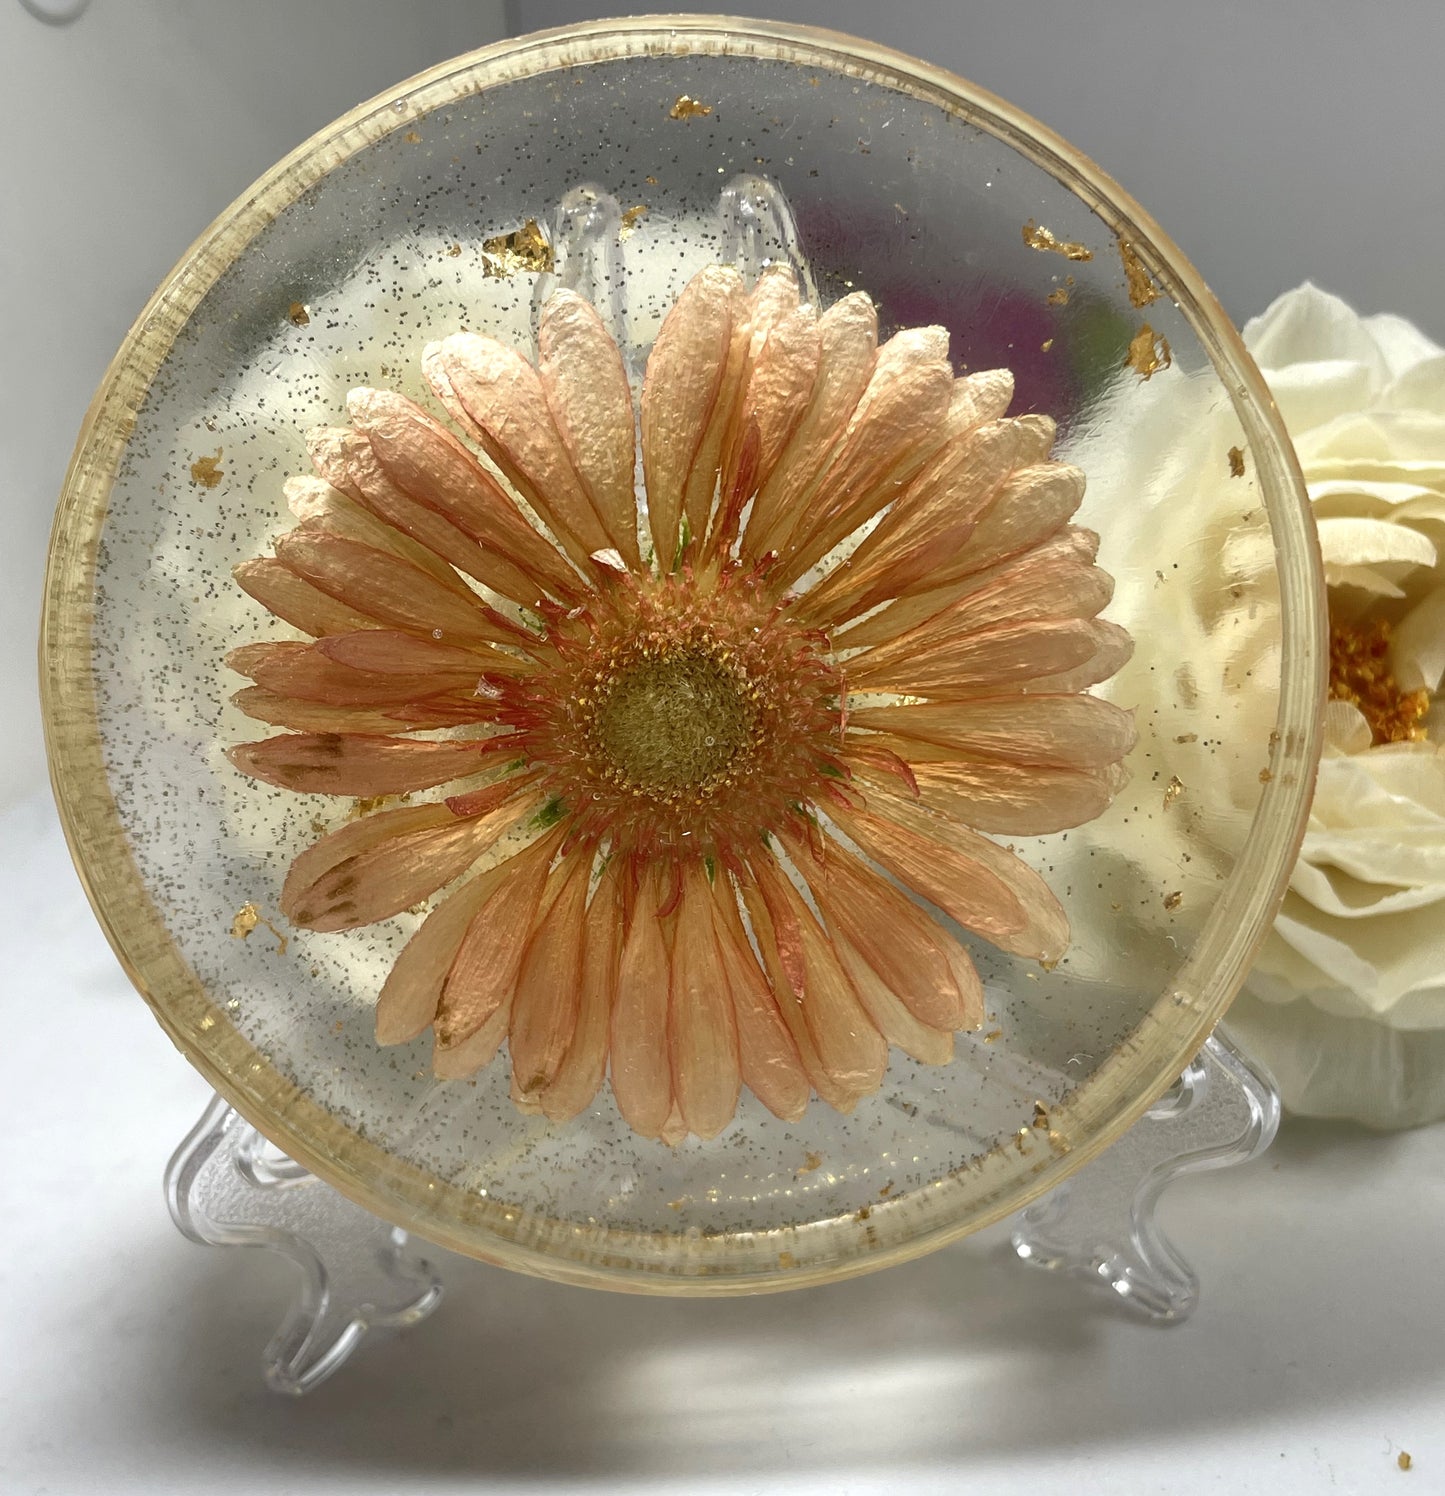 Coaster- Round Shaped with Orange Gerbera Daisy and Gold Foil